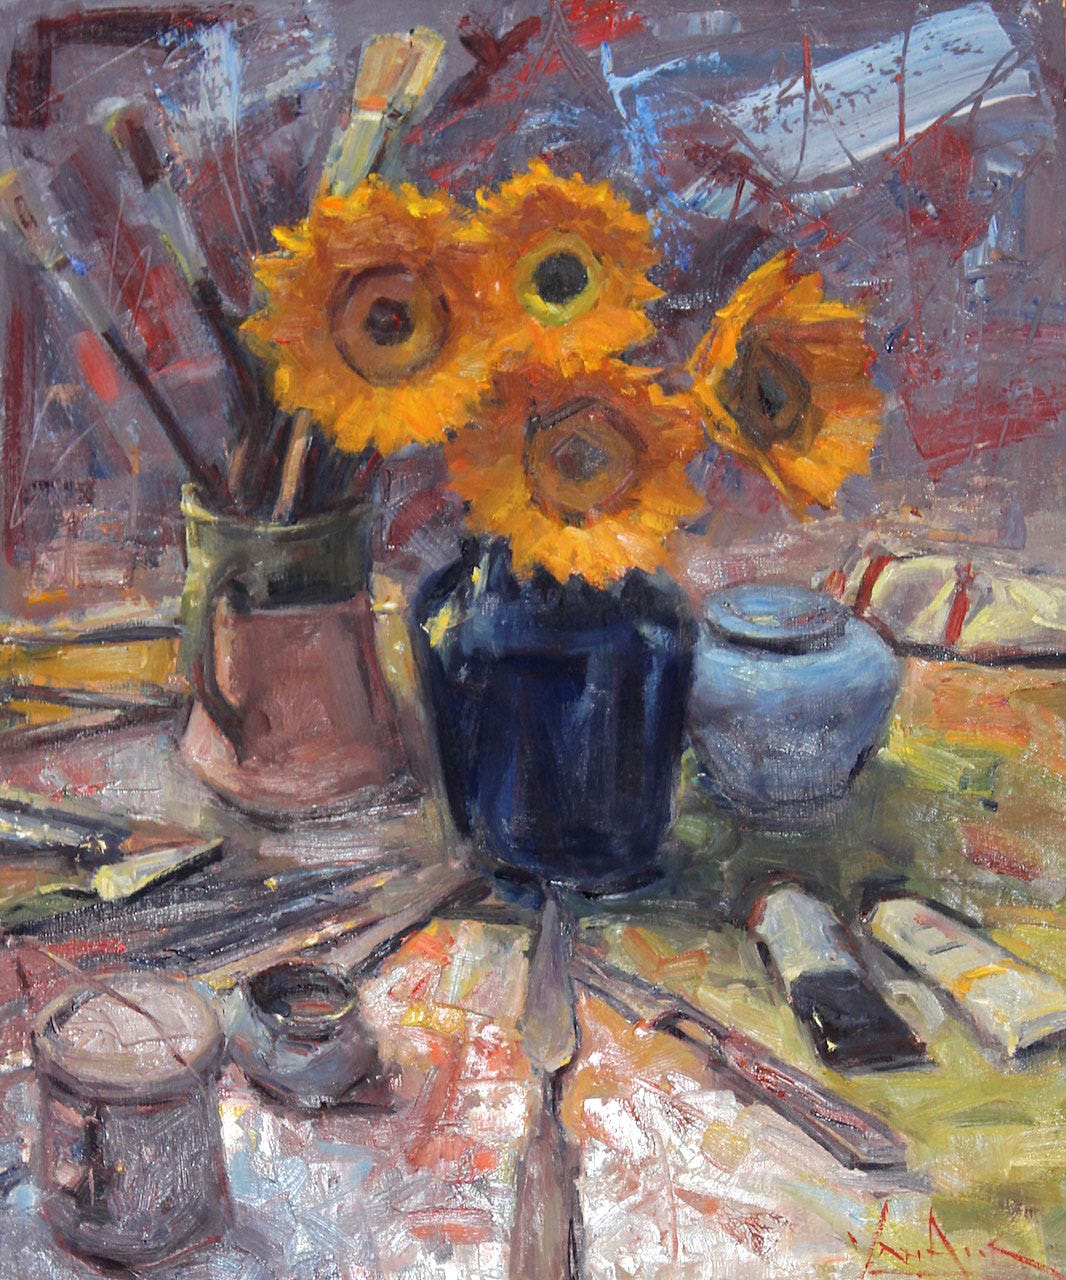 A painting of sunflowers in a blue vase

Description automatically generated